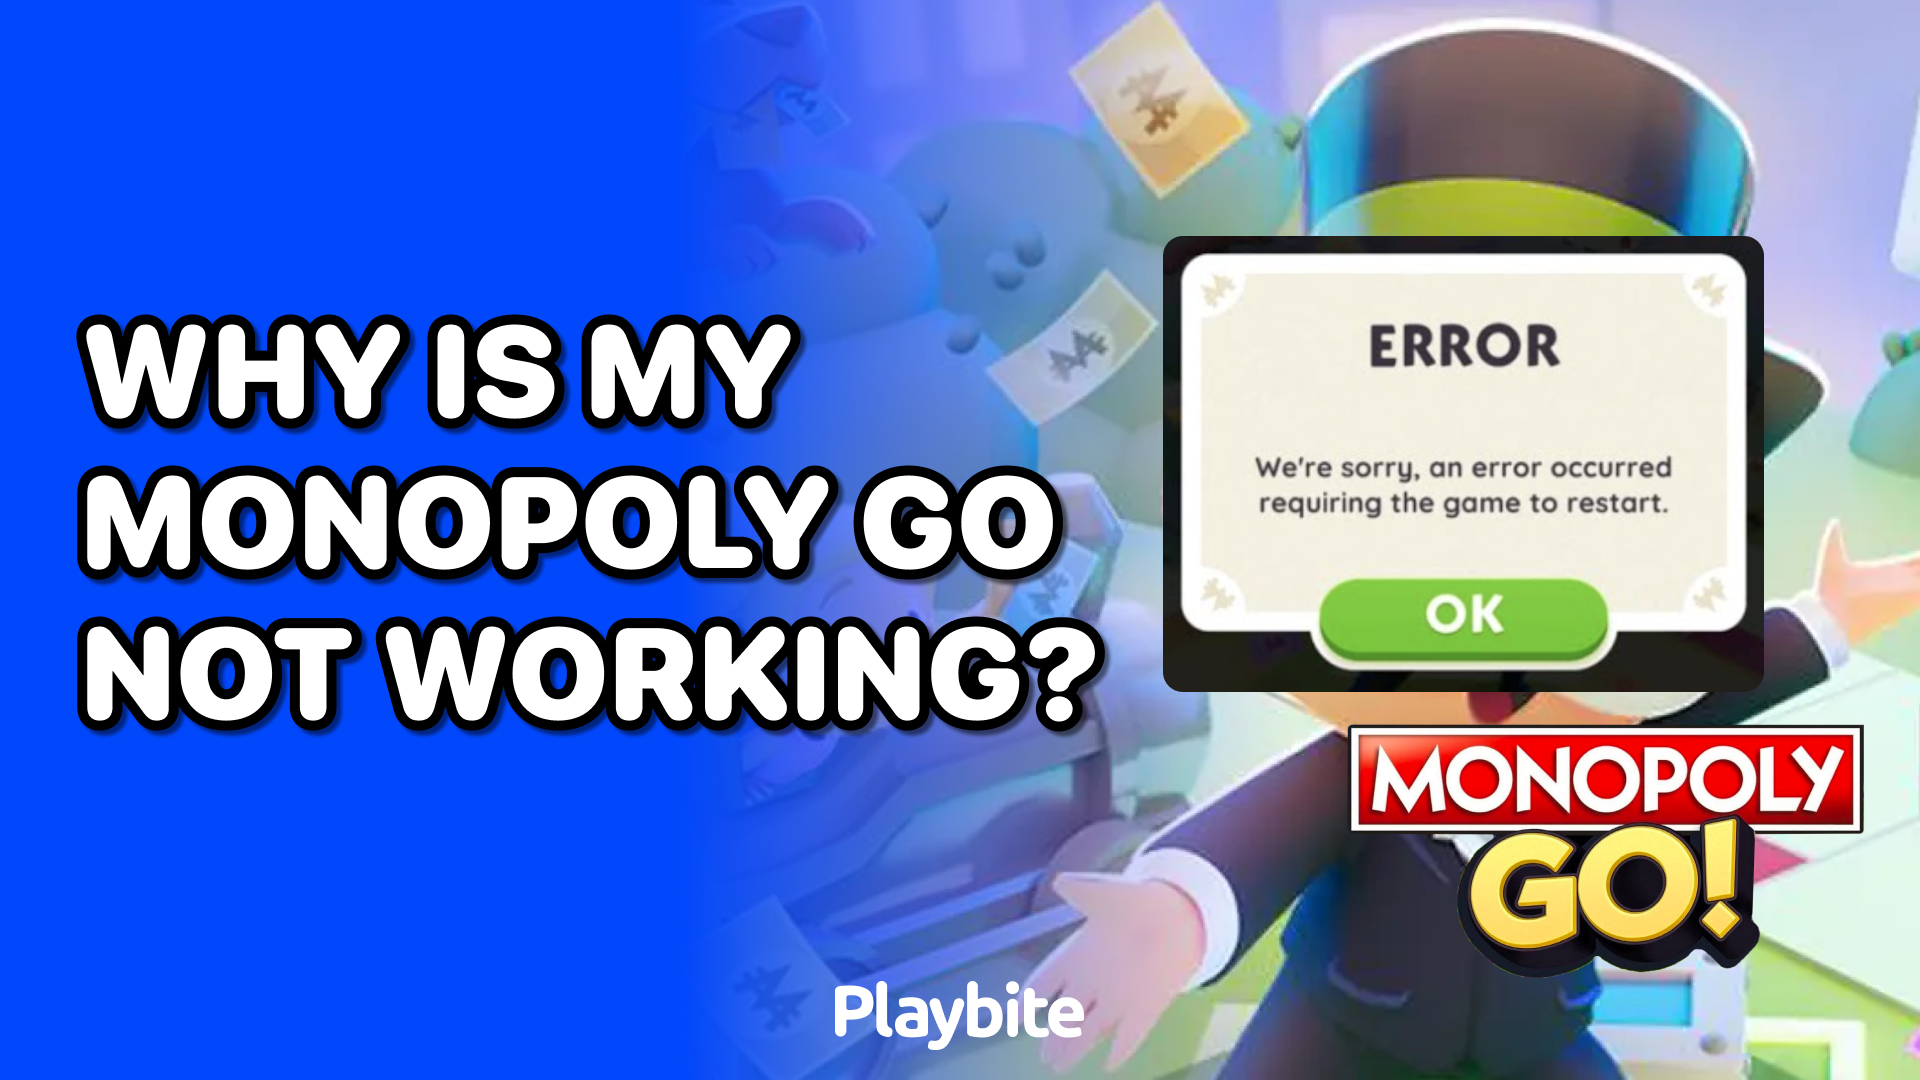 Why Is My Monopoly Go Not Working?